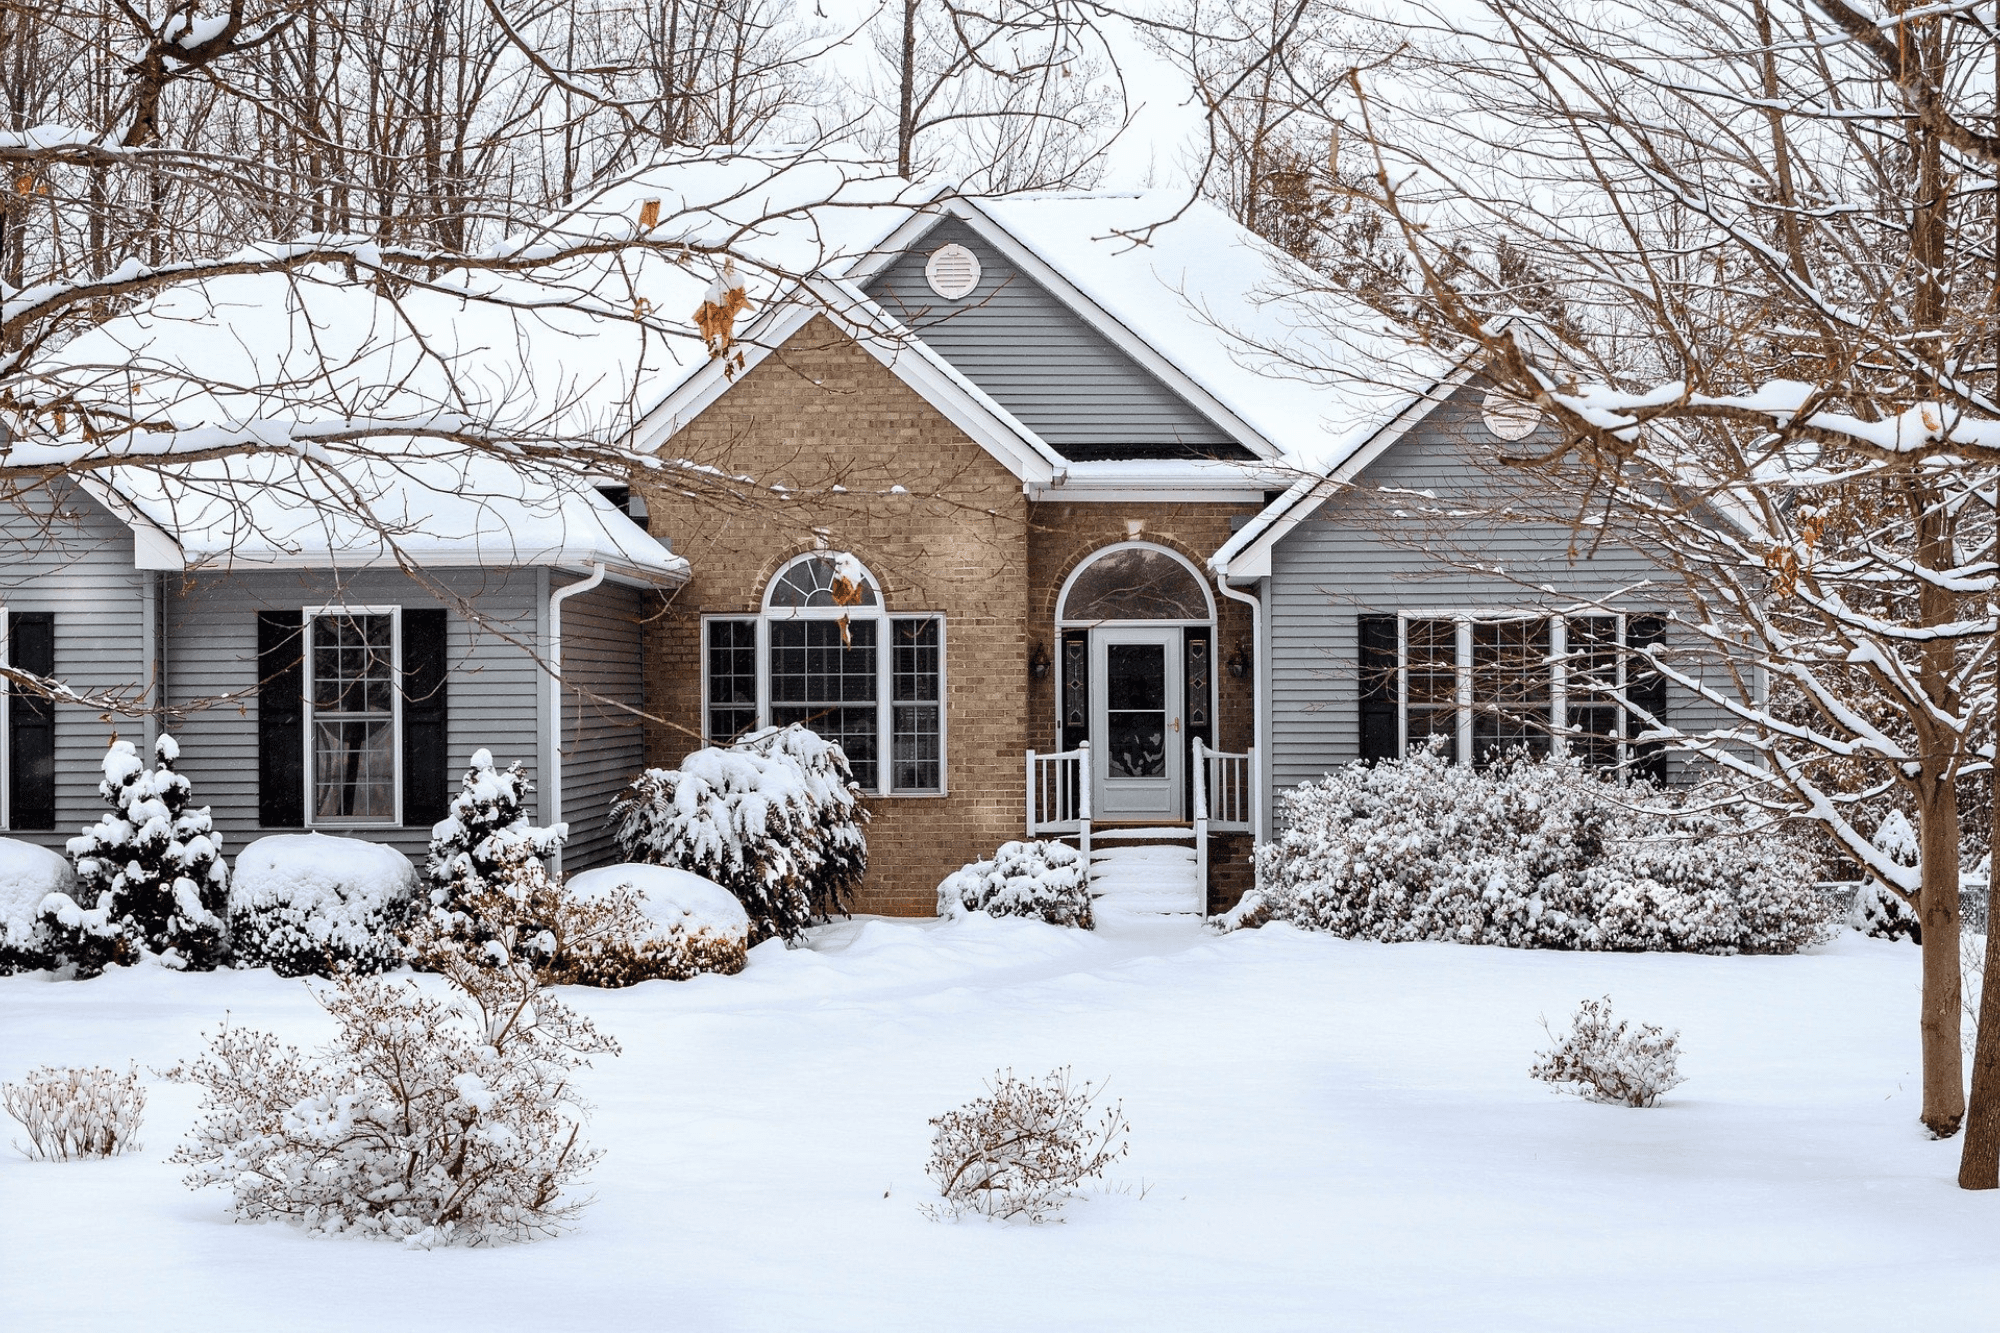 Reasons to Buy a New Construction Home in the Winter